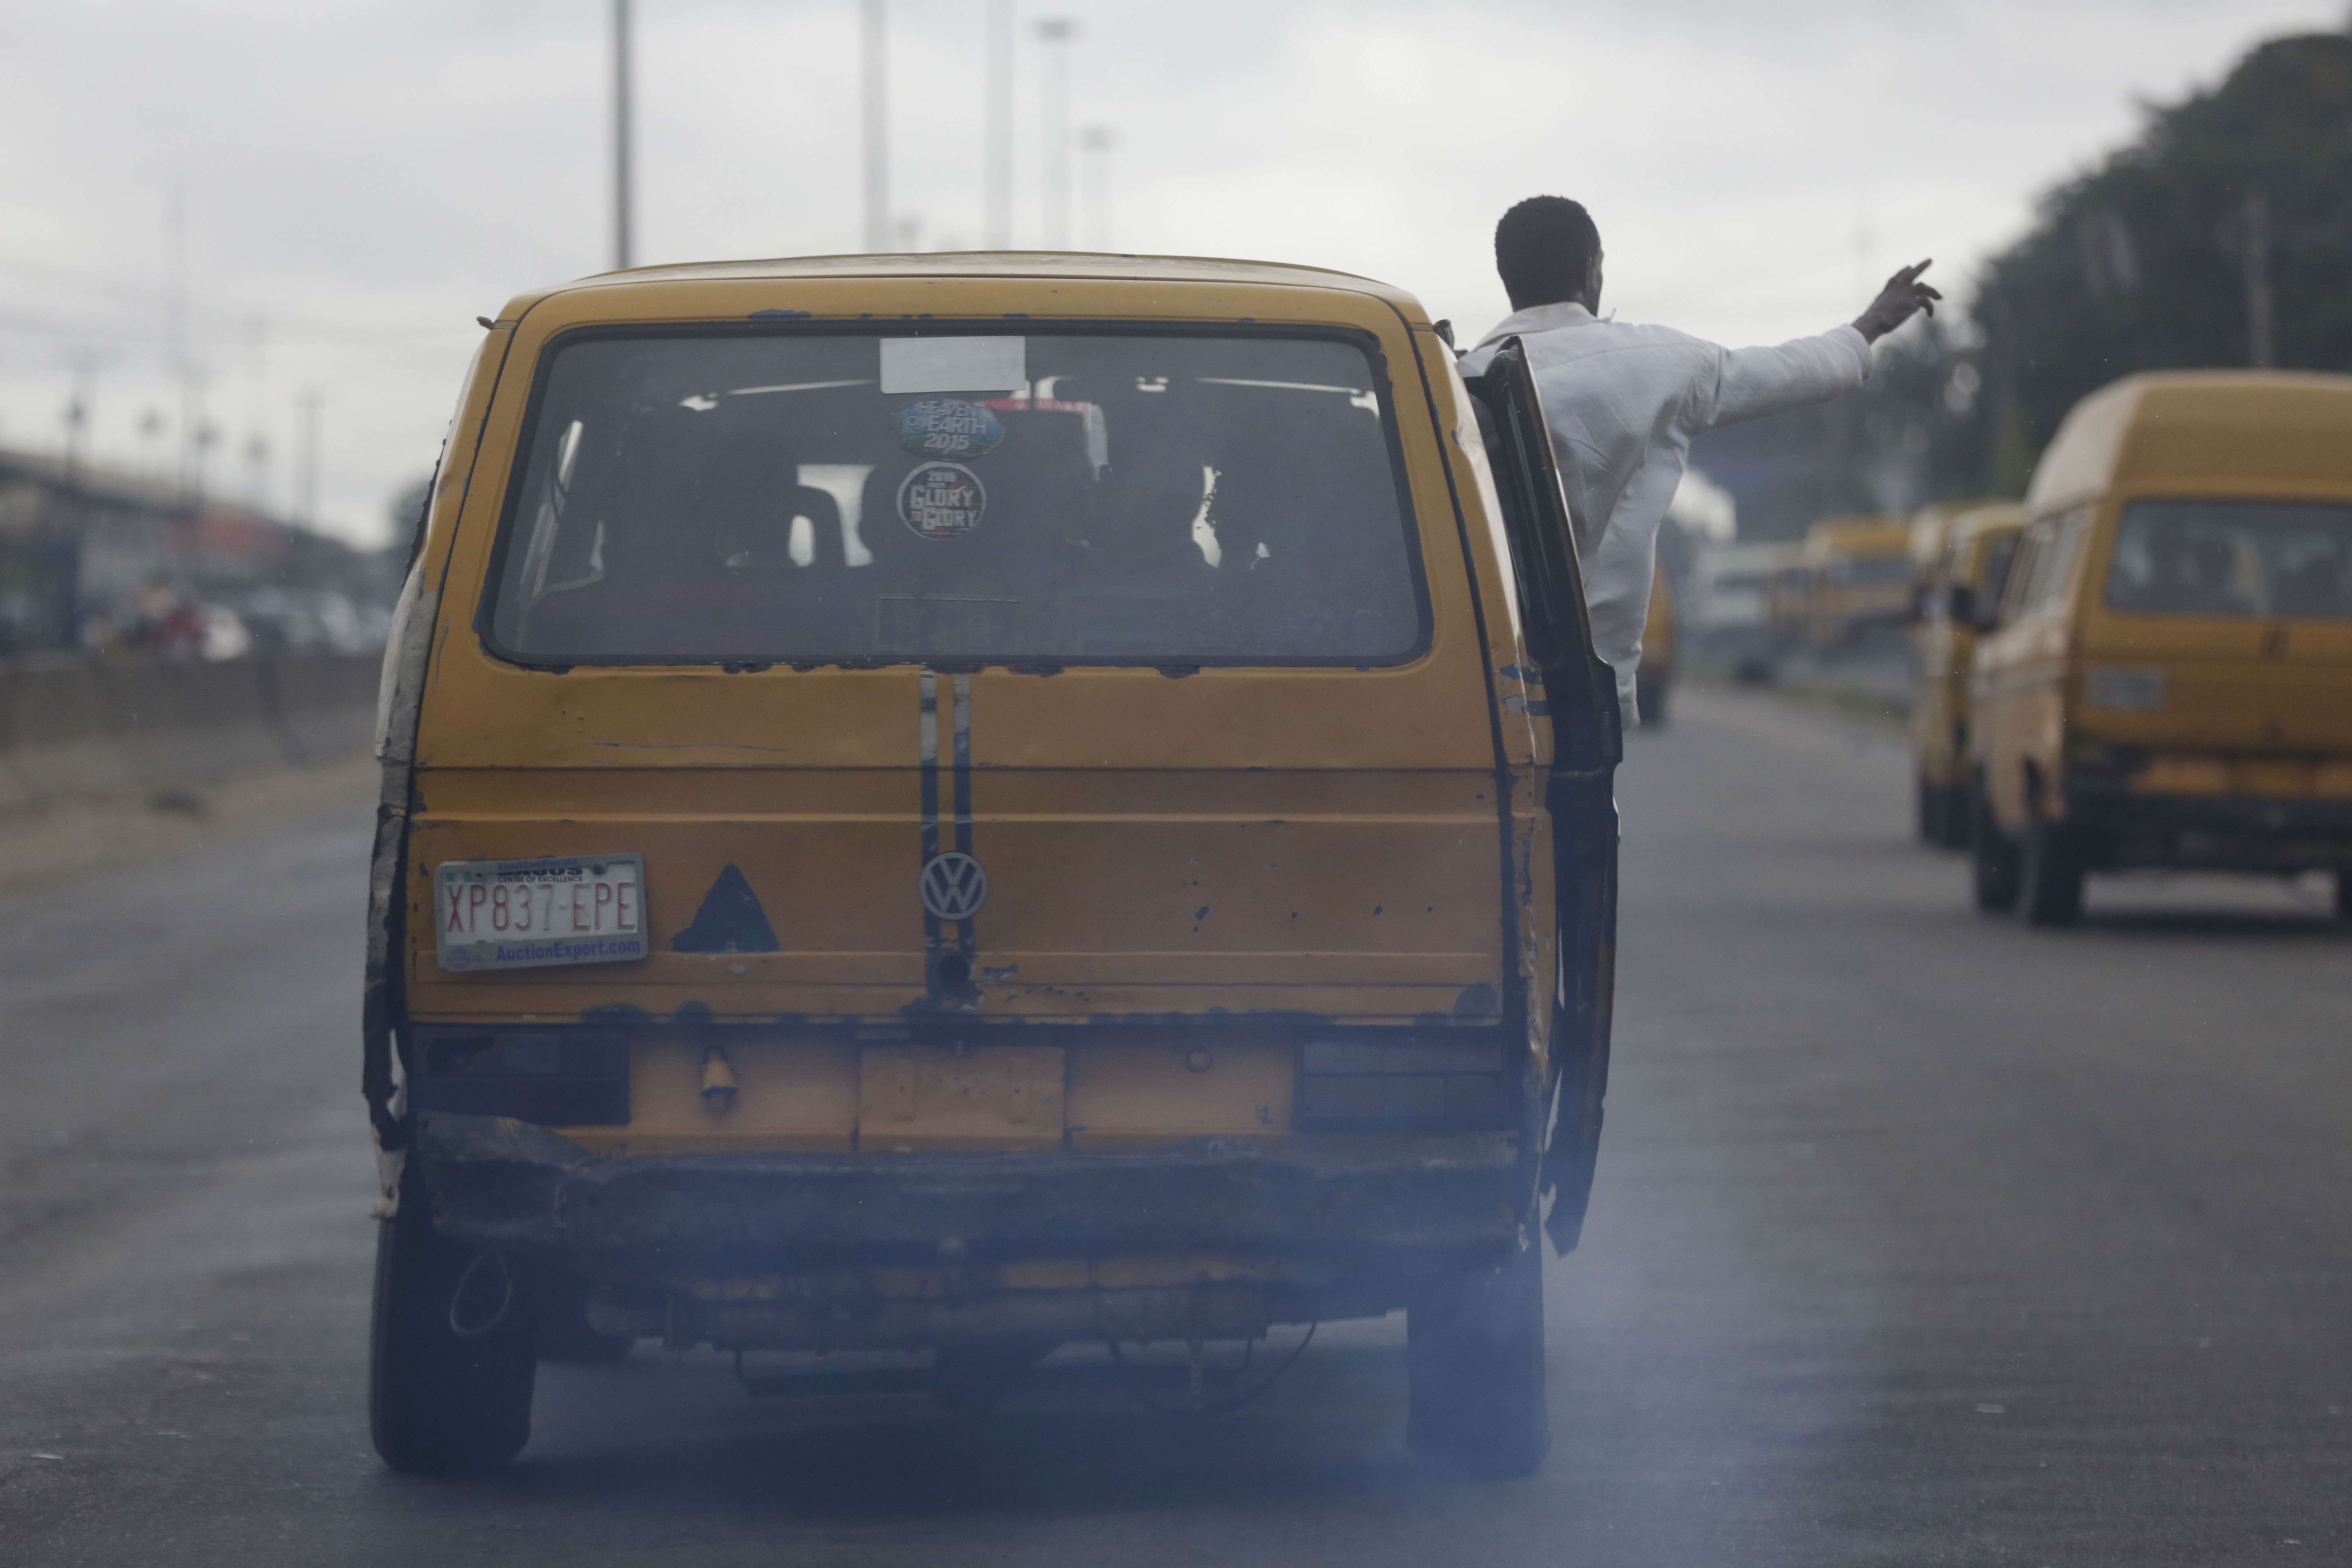 Fumes pour out of commercial buses operating on a Lagos street. The city successfully curbed the spread of Ebola through a vigorous public health effort and social mobilisation. Photo: AP